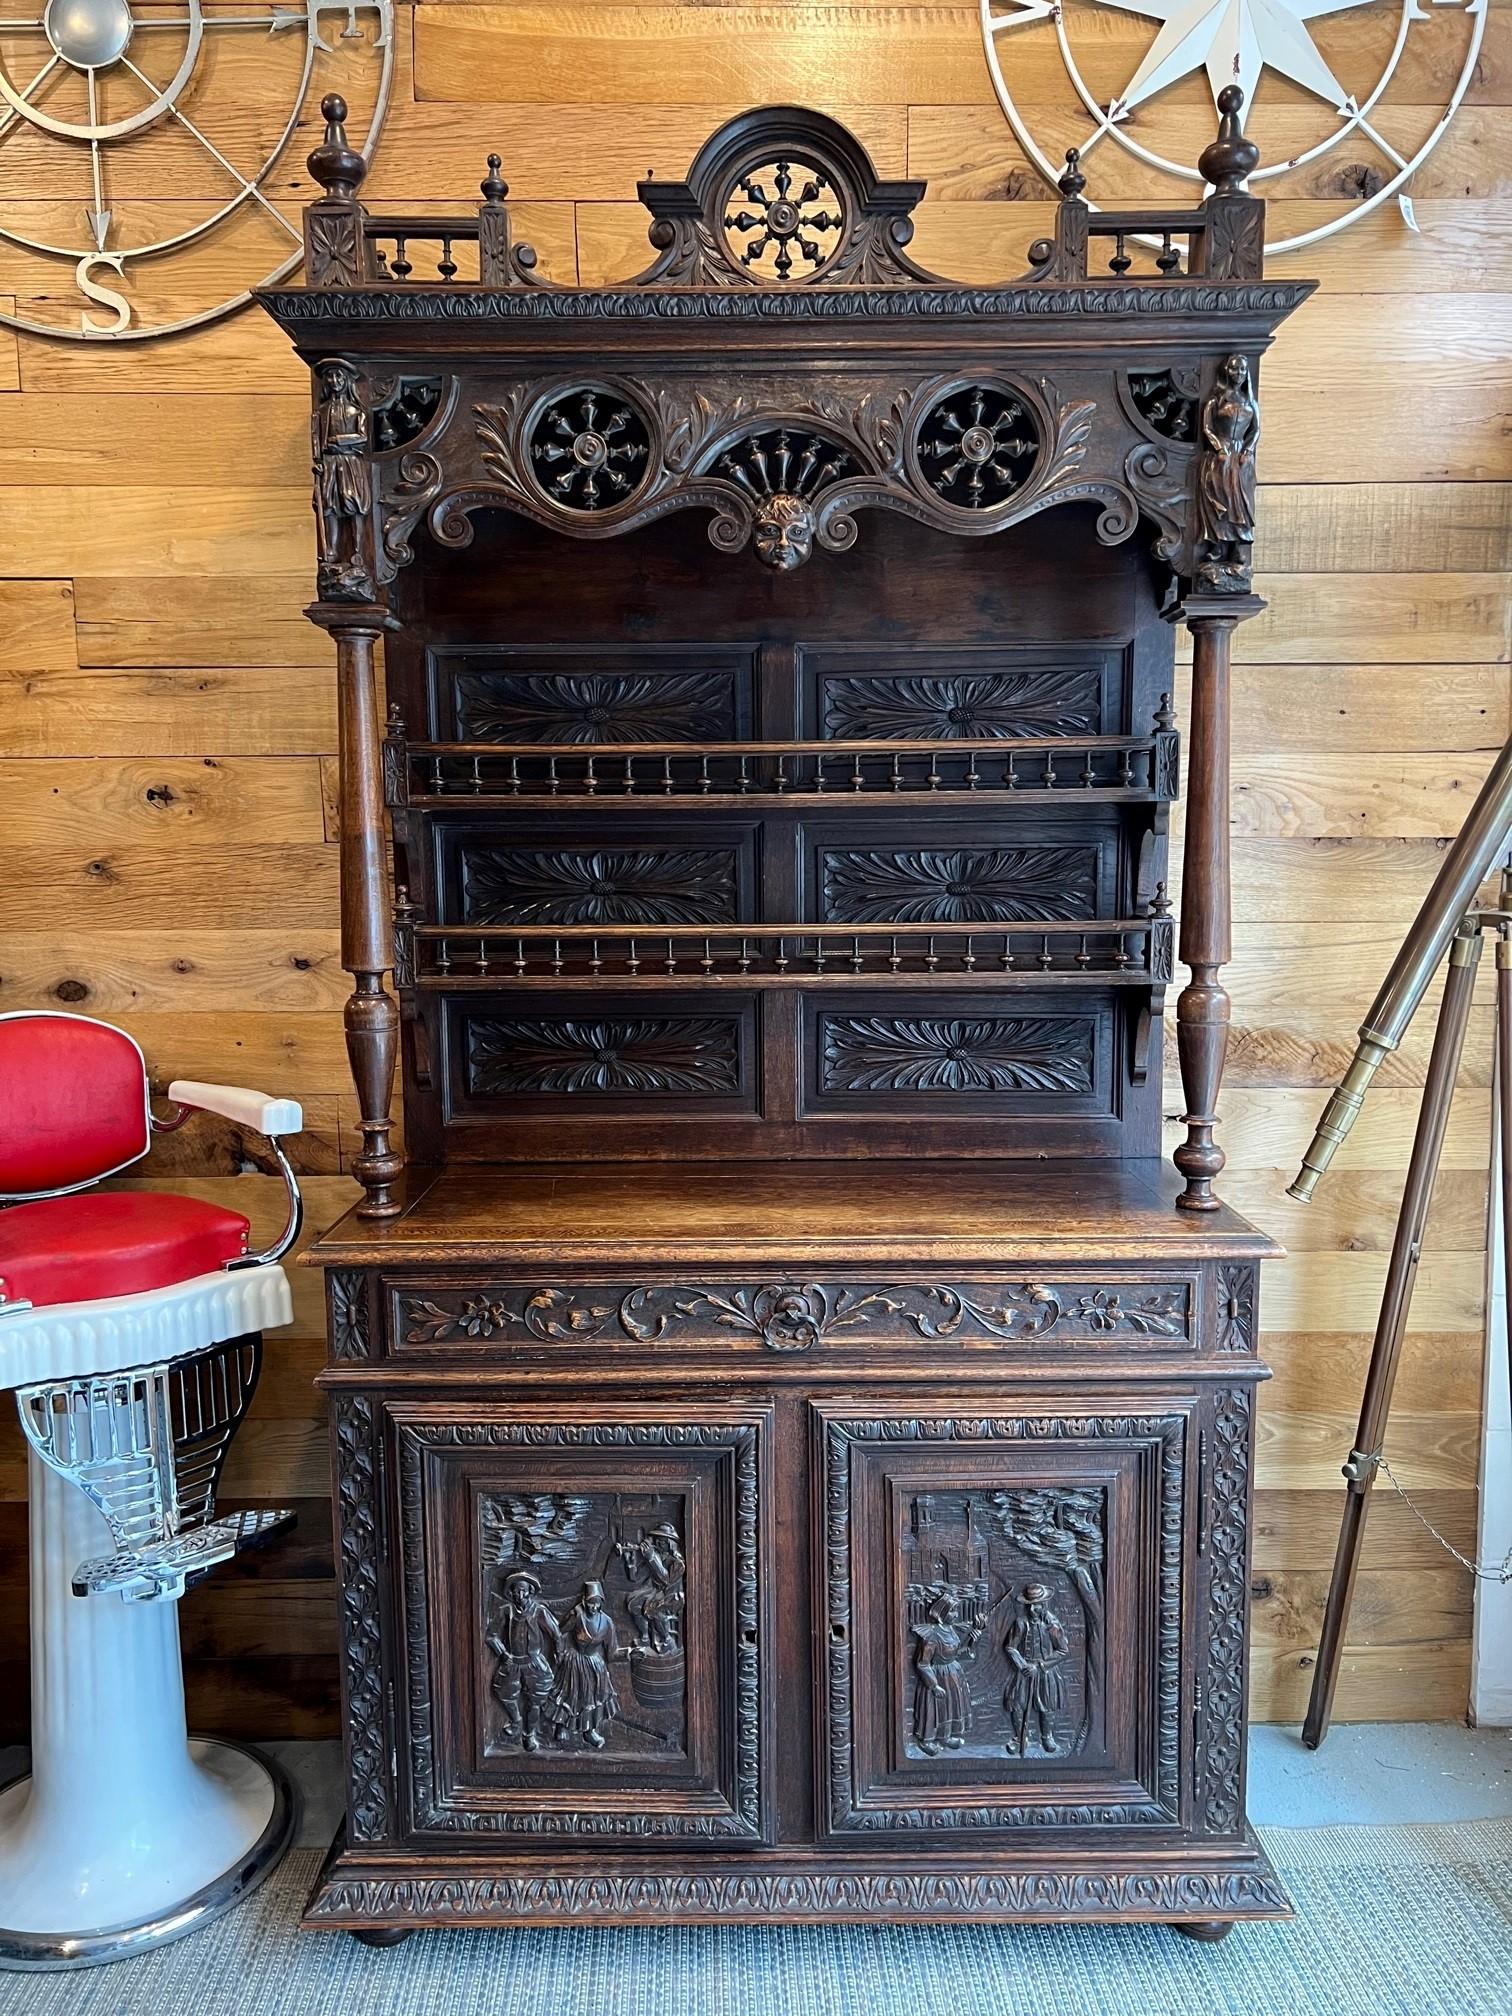 Absolutely Amazing Antique Brittany style French two door, single drawer carved cabinet with an upper plate gallery. French Breton design also known as Brittany style originated in the late 19th century France in a region to the west of Normandy,